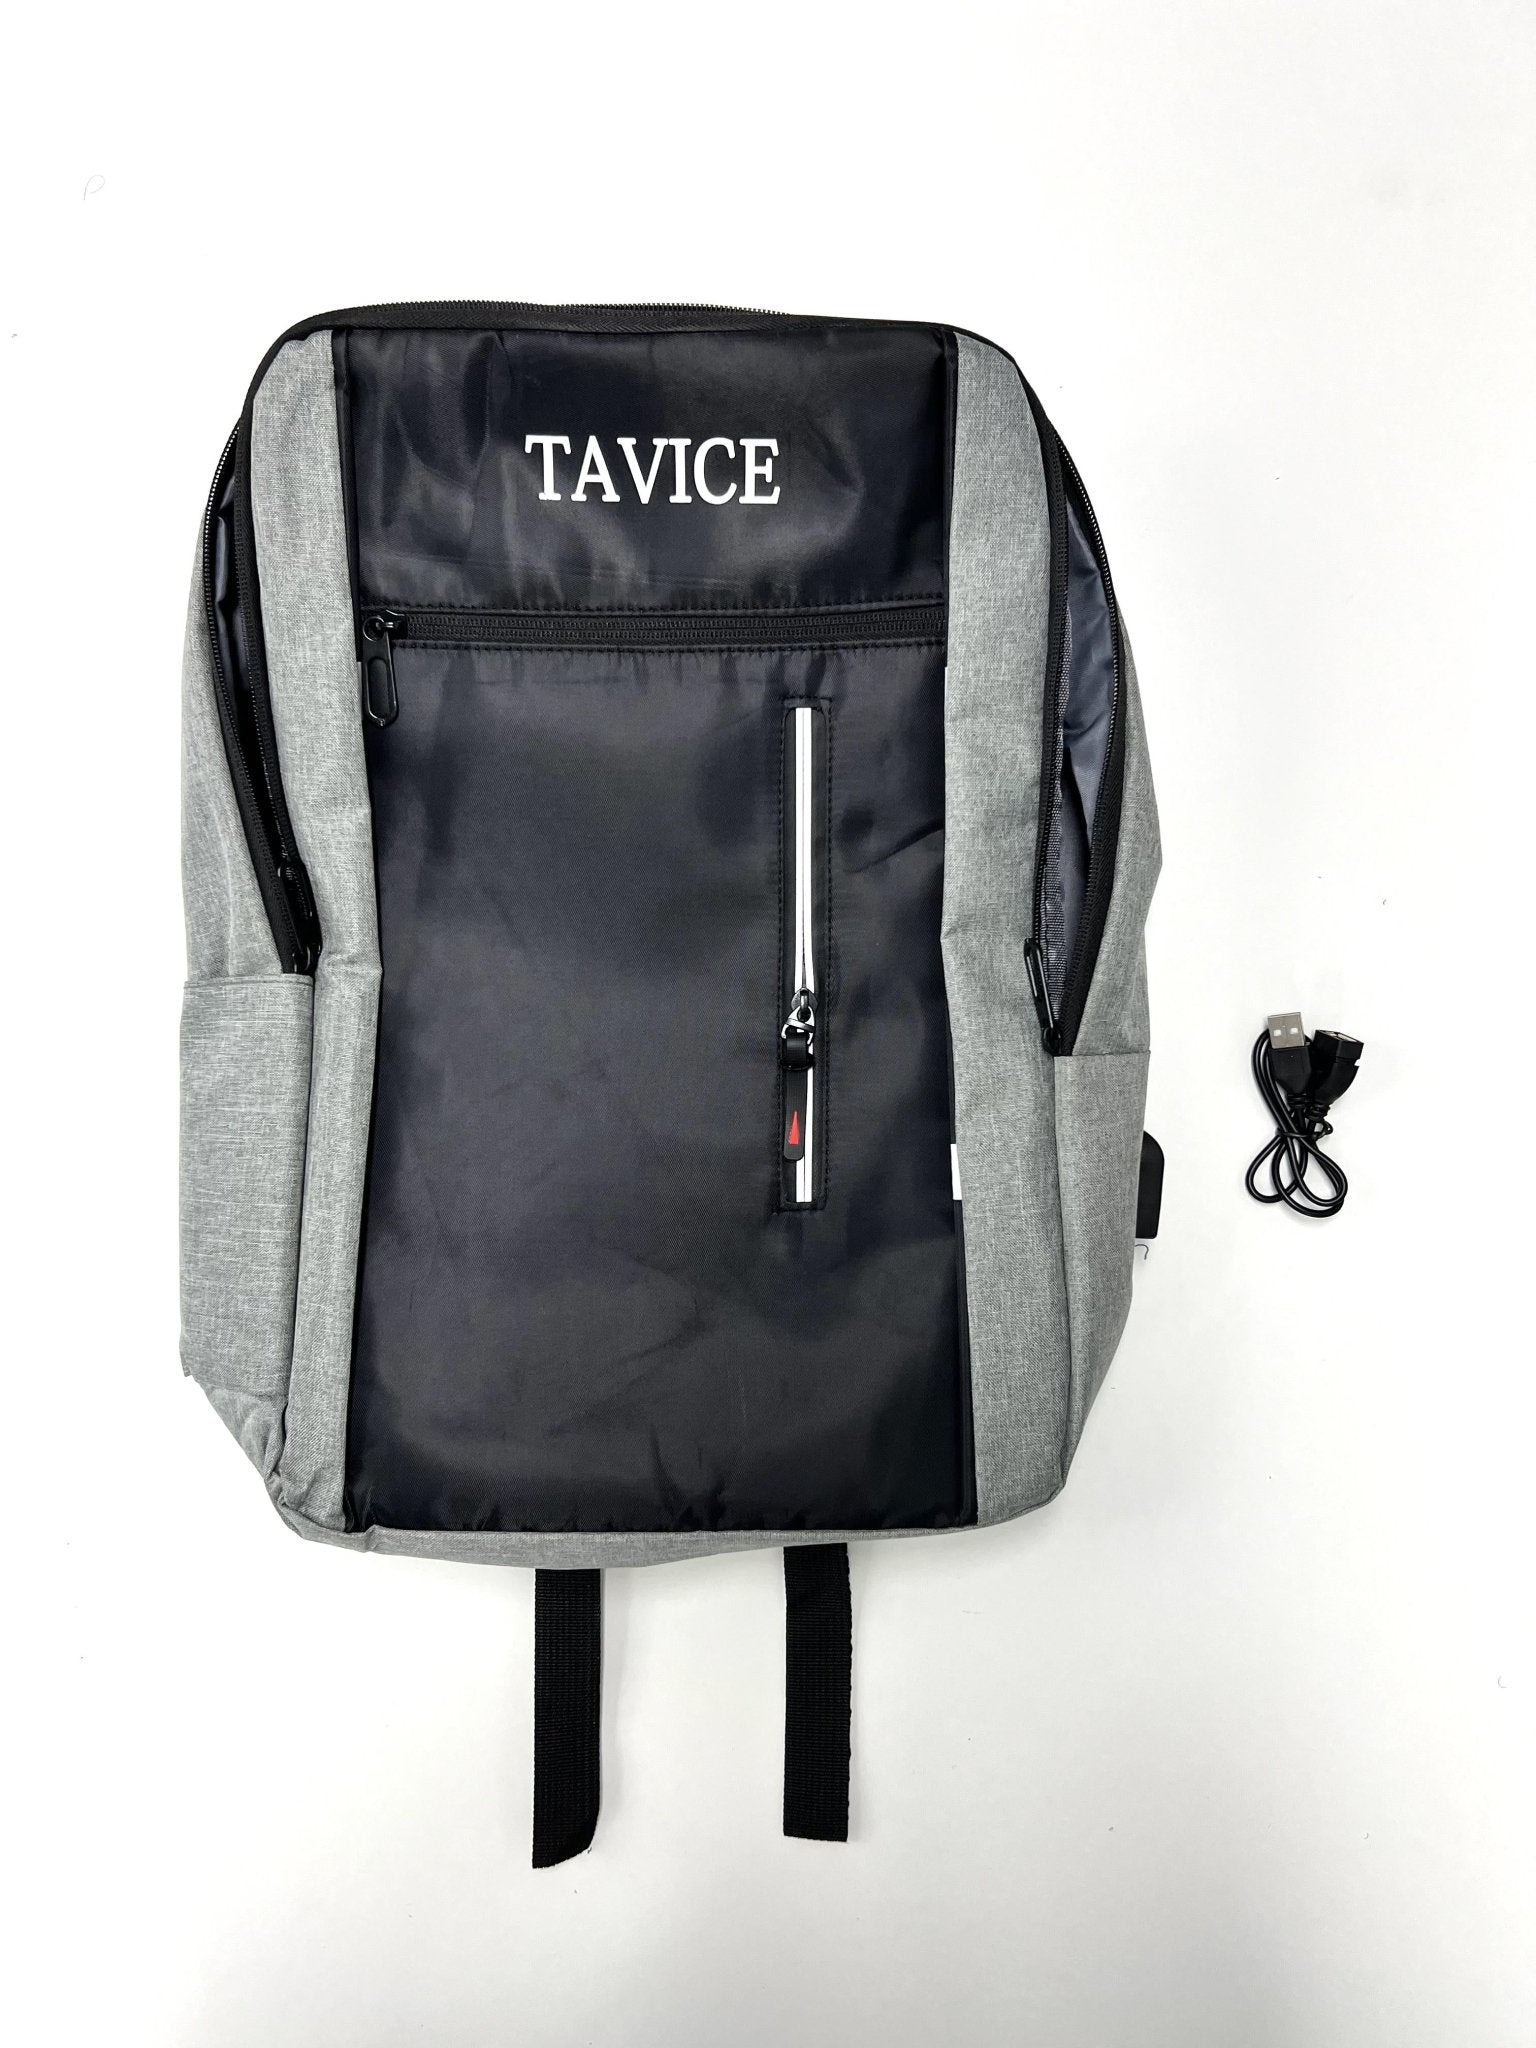 TAVICE Anti-theft Laptop Backpack, Large Capacity Business Bag For Travel, Business Nylon - Office Catch